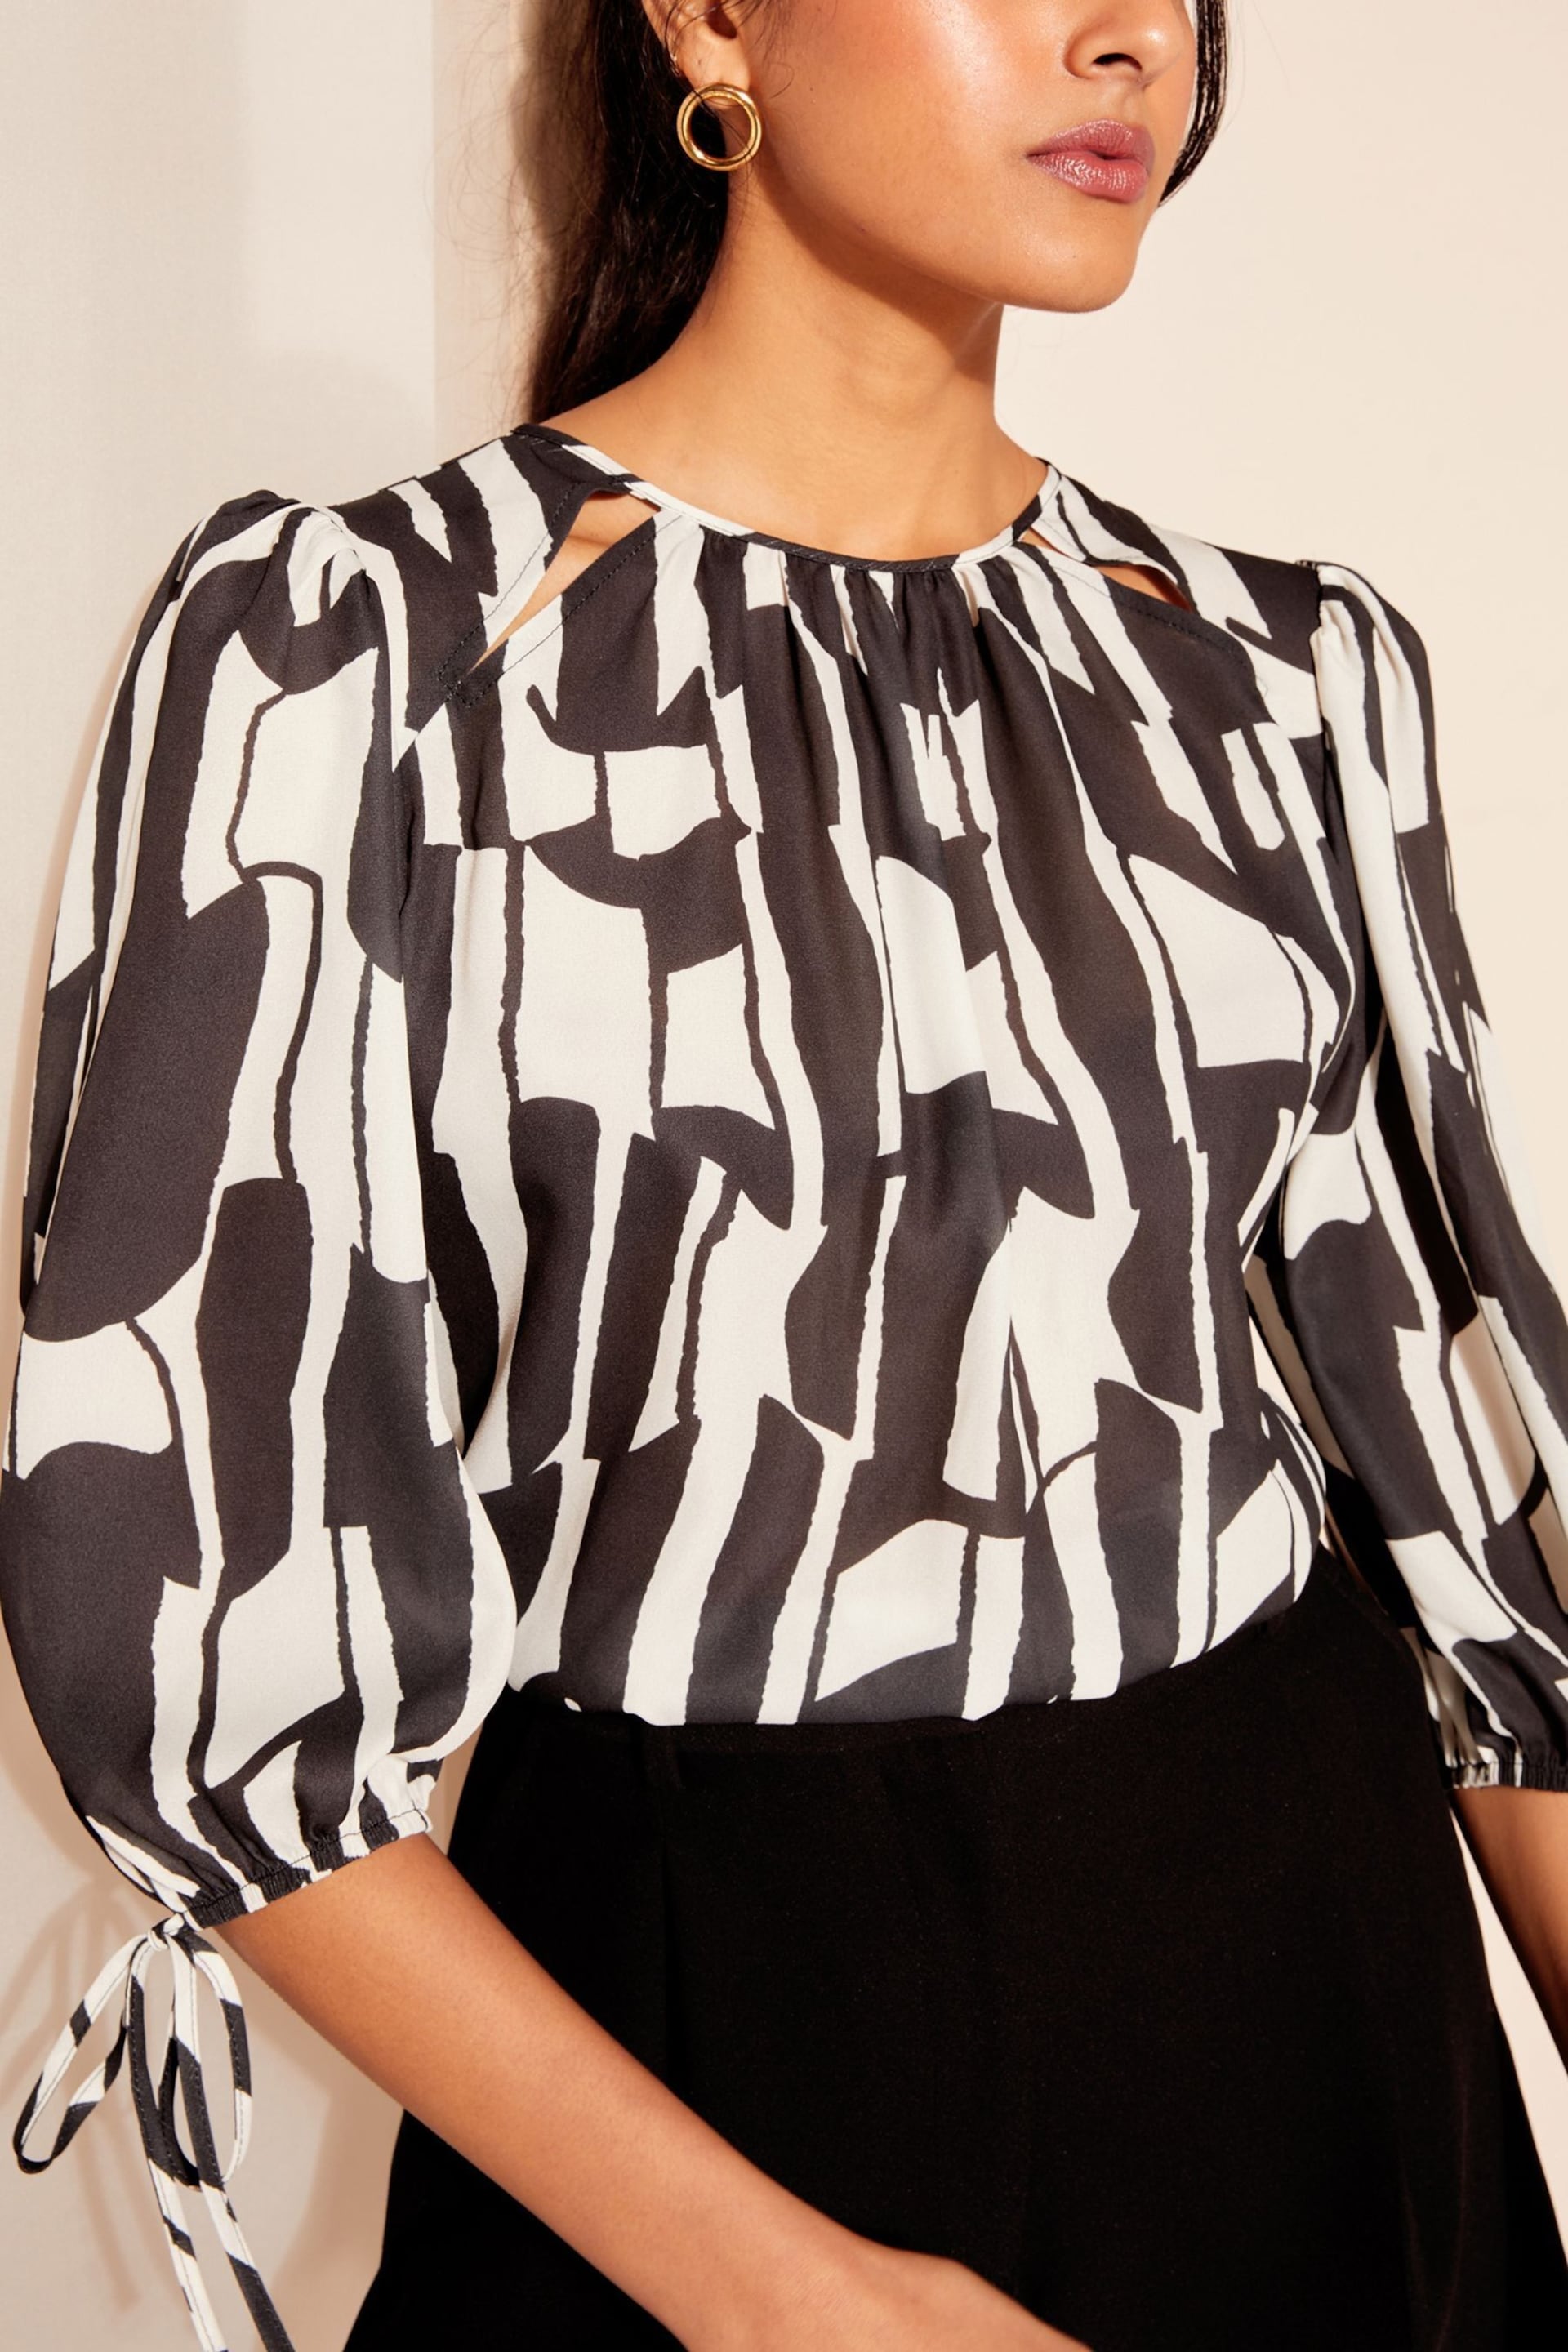 Friends Like These Black/White 3/4 Sleeve Chiffon Tie Cuff Blouse - Image 1 of 4